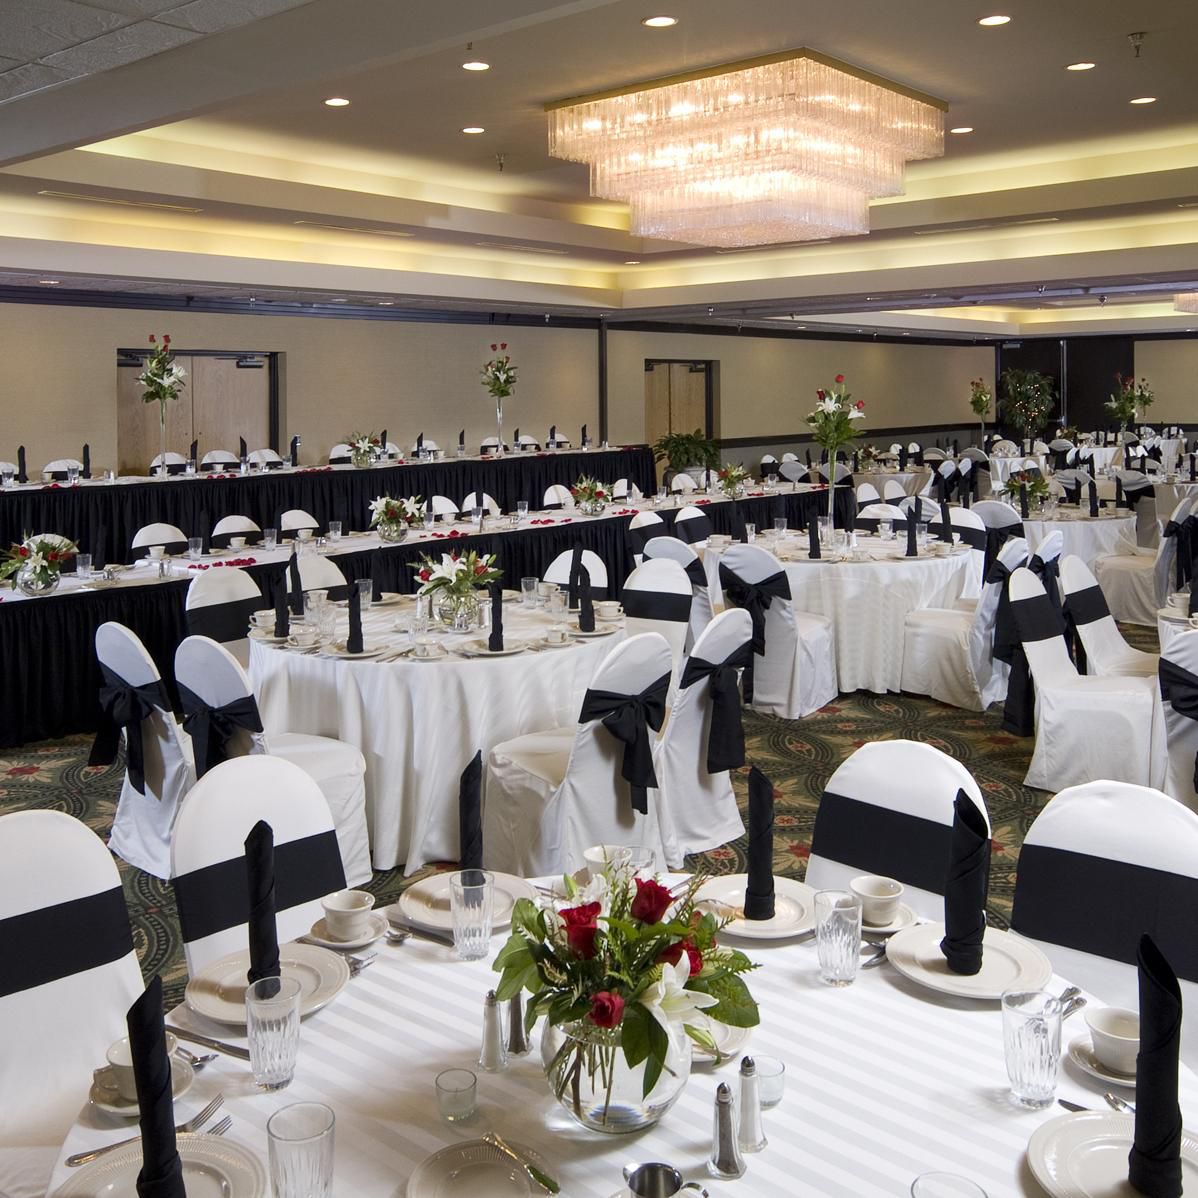 Our Ballroom is the perfect venue for any event.